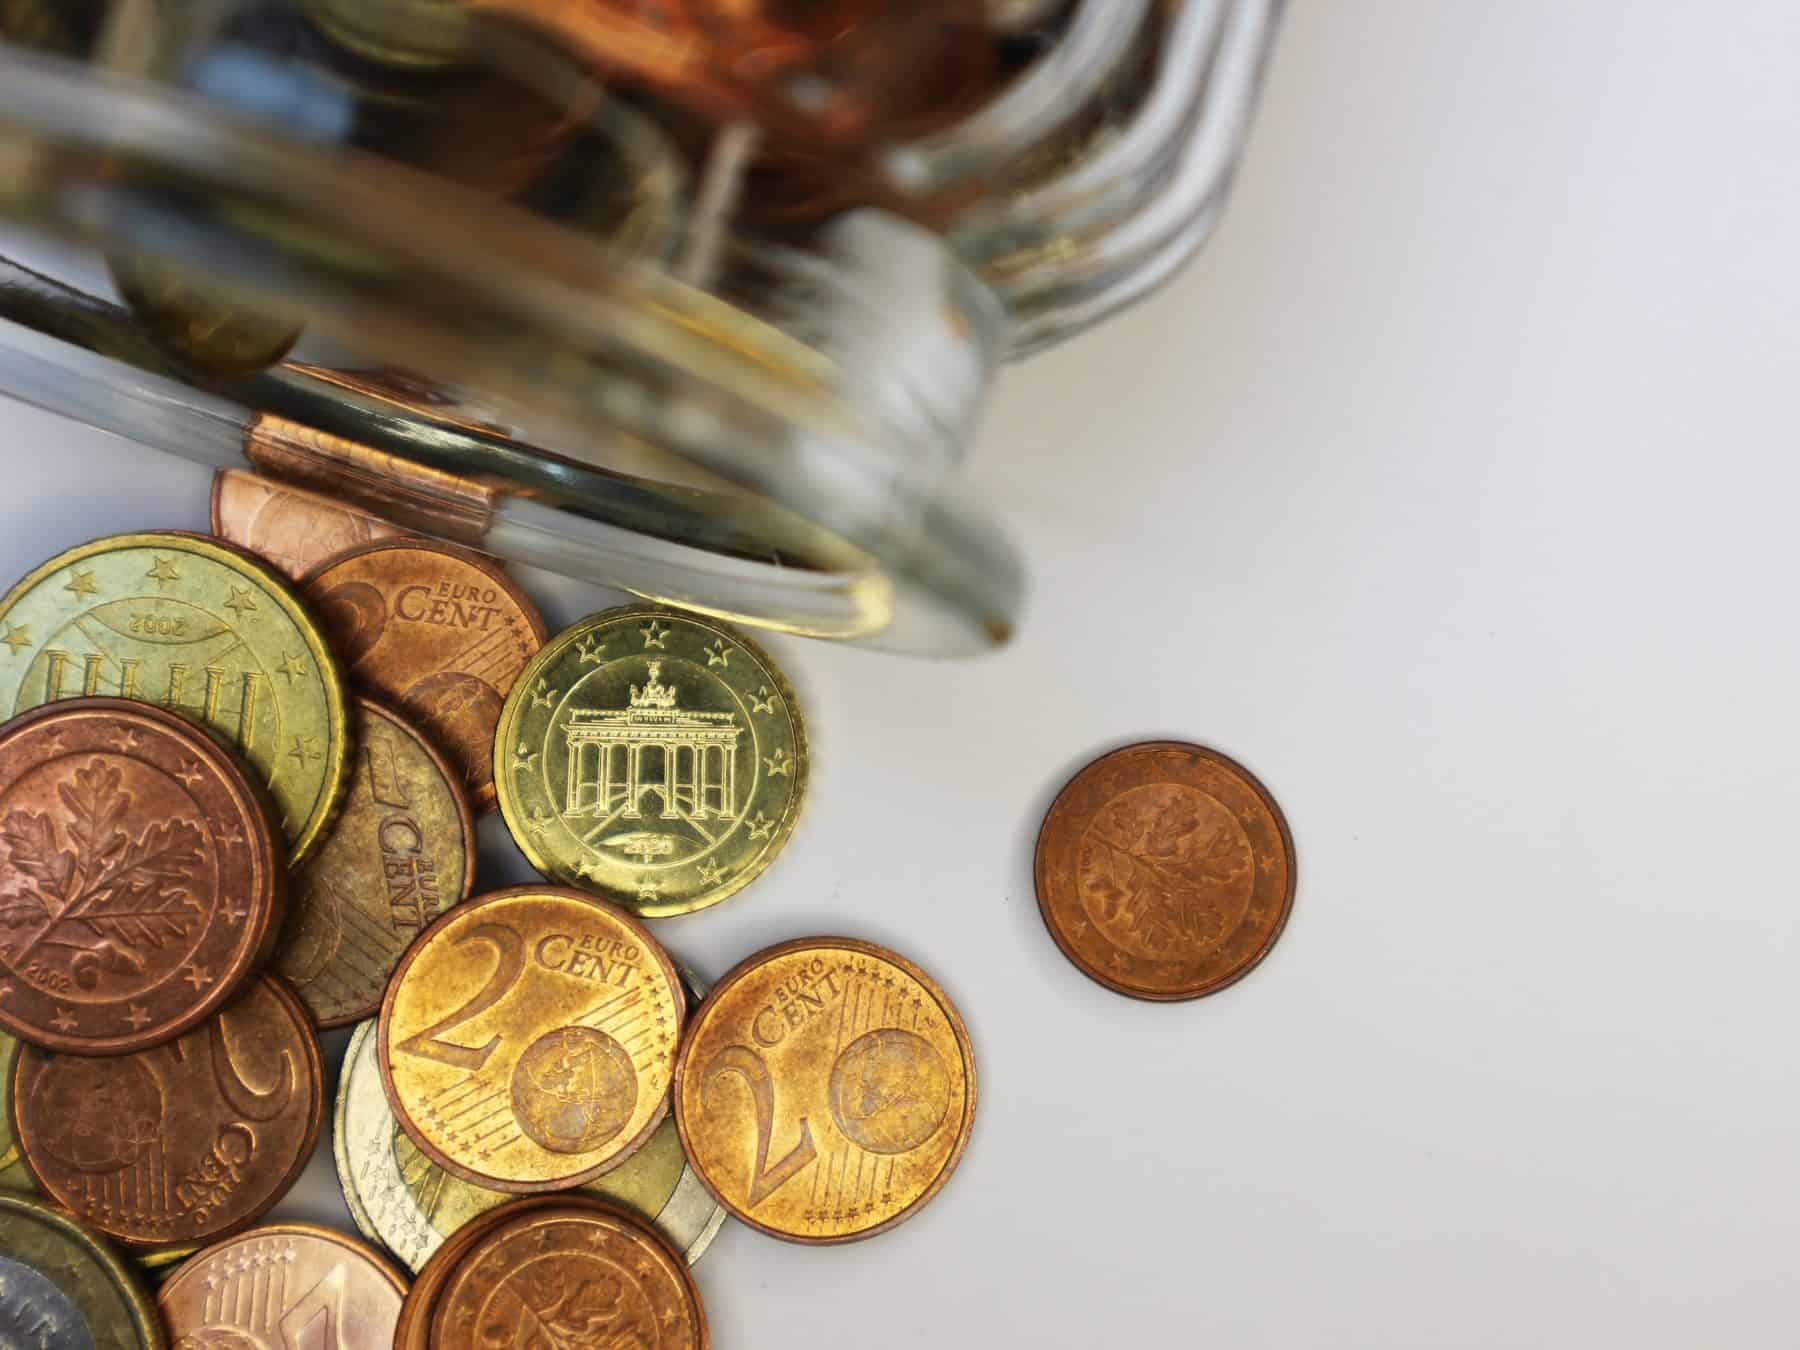 A collection of euro coins, Image source Roman Wimmers, free to use under the Unsplash License